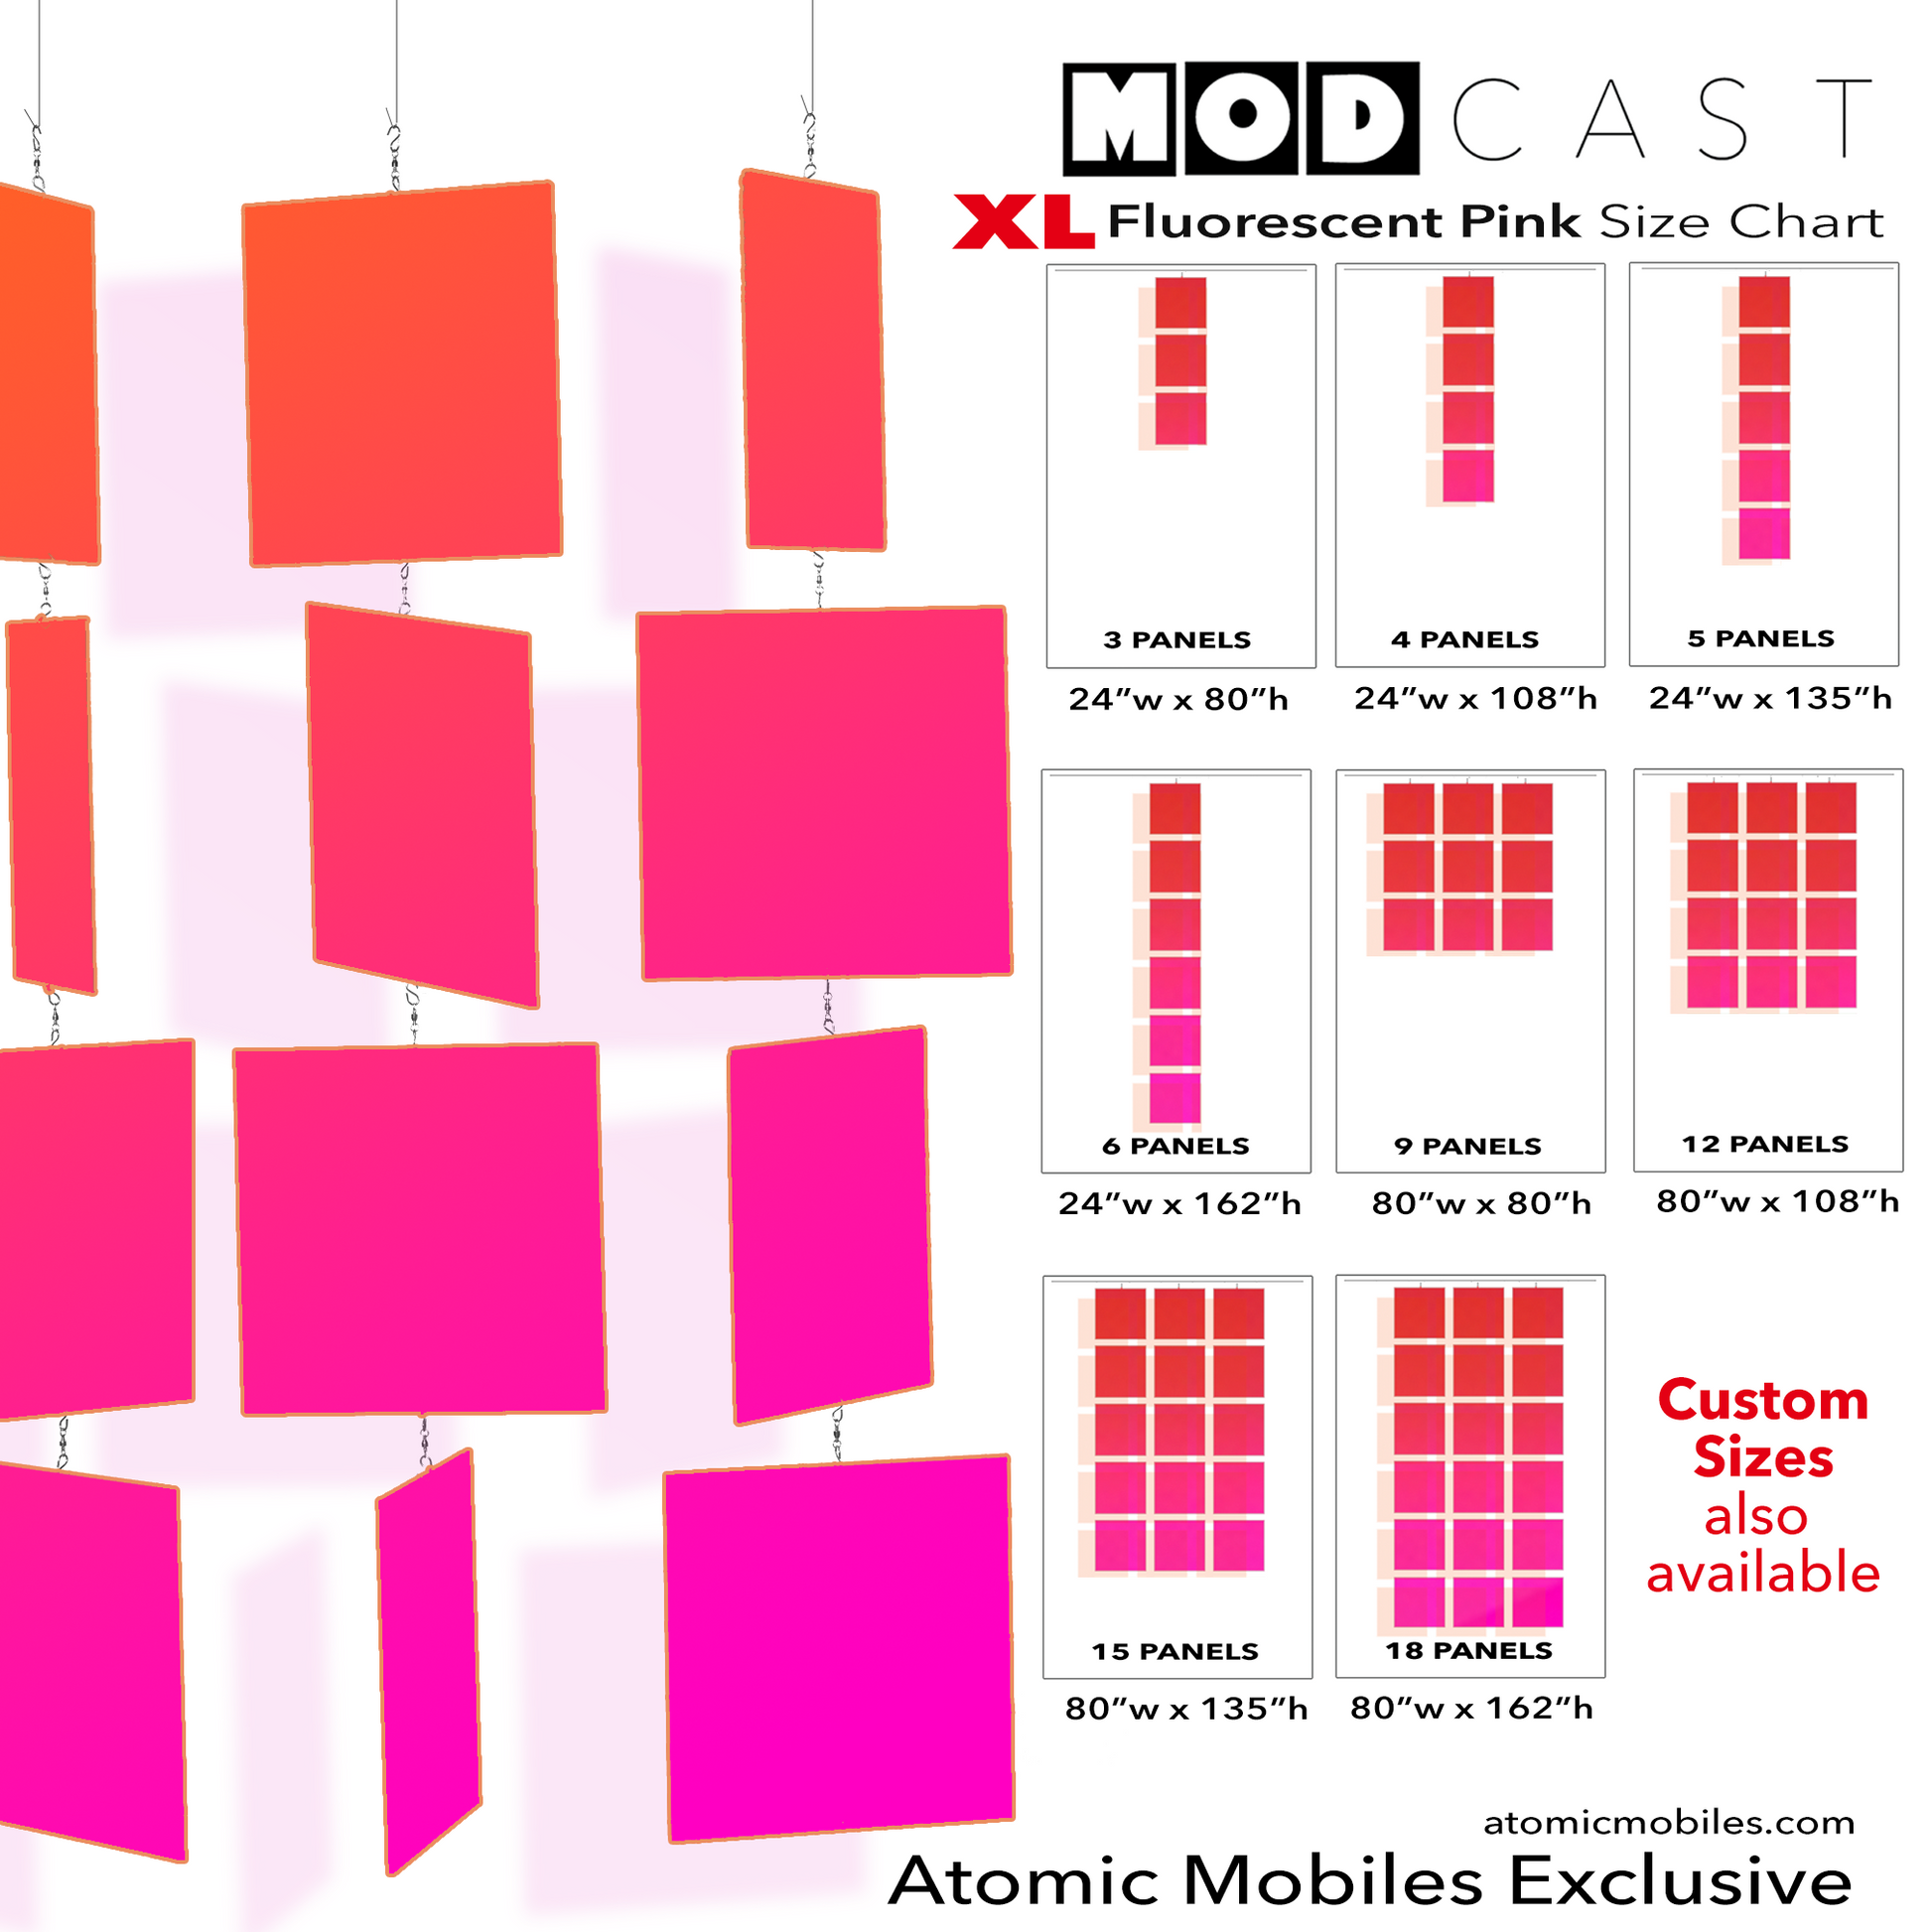 Size Chart for MODcast XXL Huge hanging art mobiles in fluorescent pink acrylic plexiglass - made in Los Angeles by AtomicMobiles.com